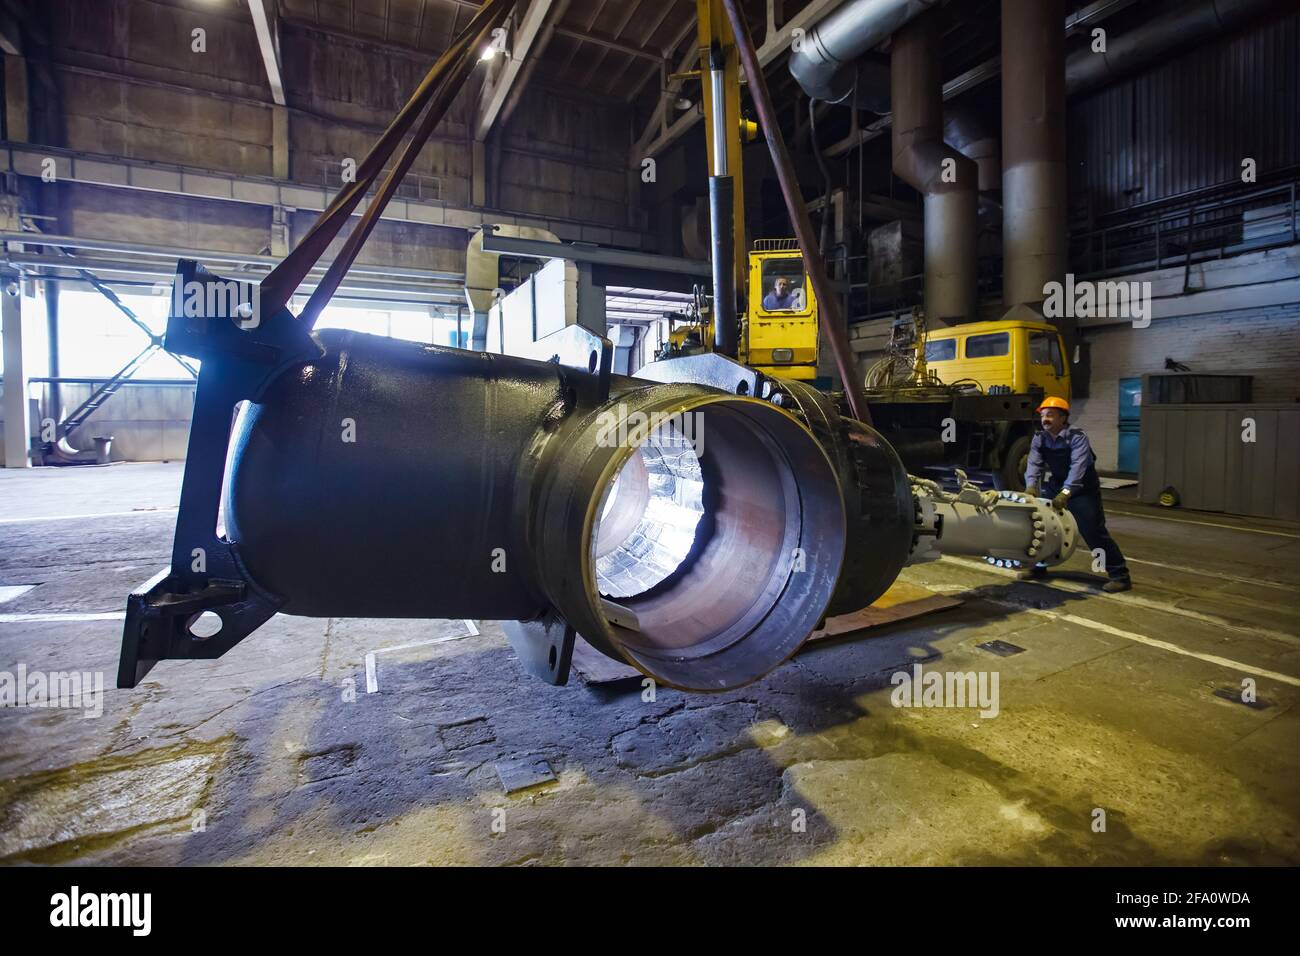 Worker lifts giant shut-off valve by mobile crane. Oil and gas industry equipment production plant workshop.Ust-Kamenogorsk, Kazakhstan. Stock Photo